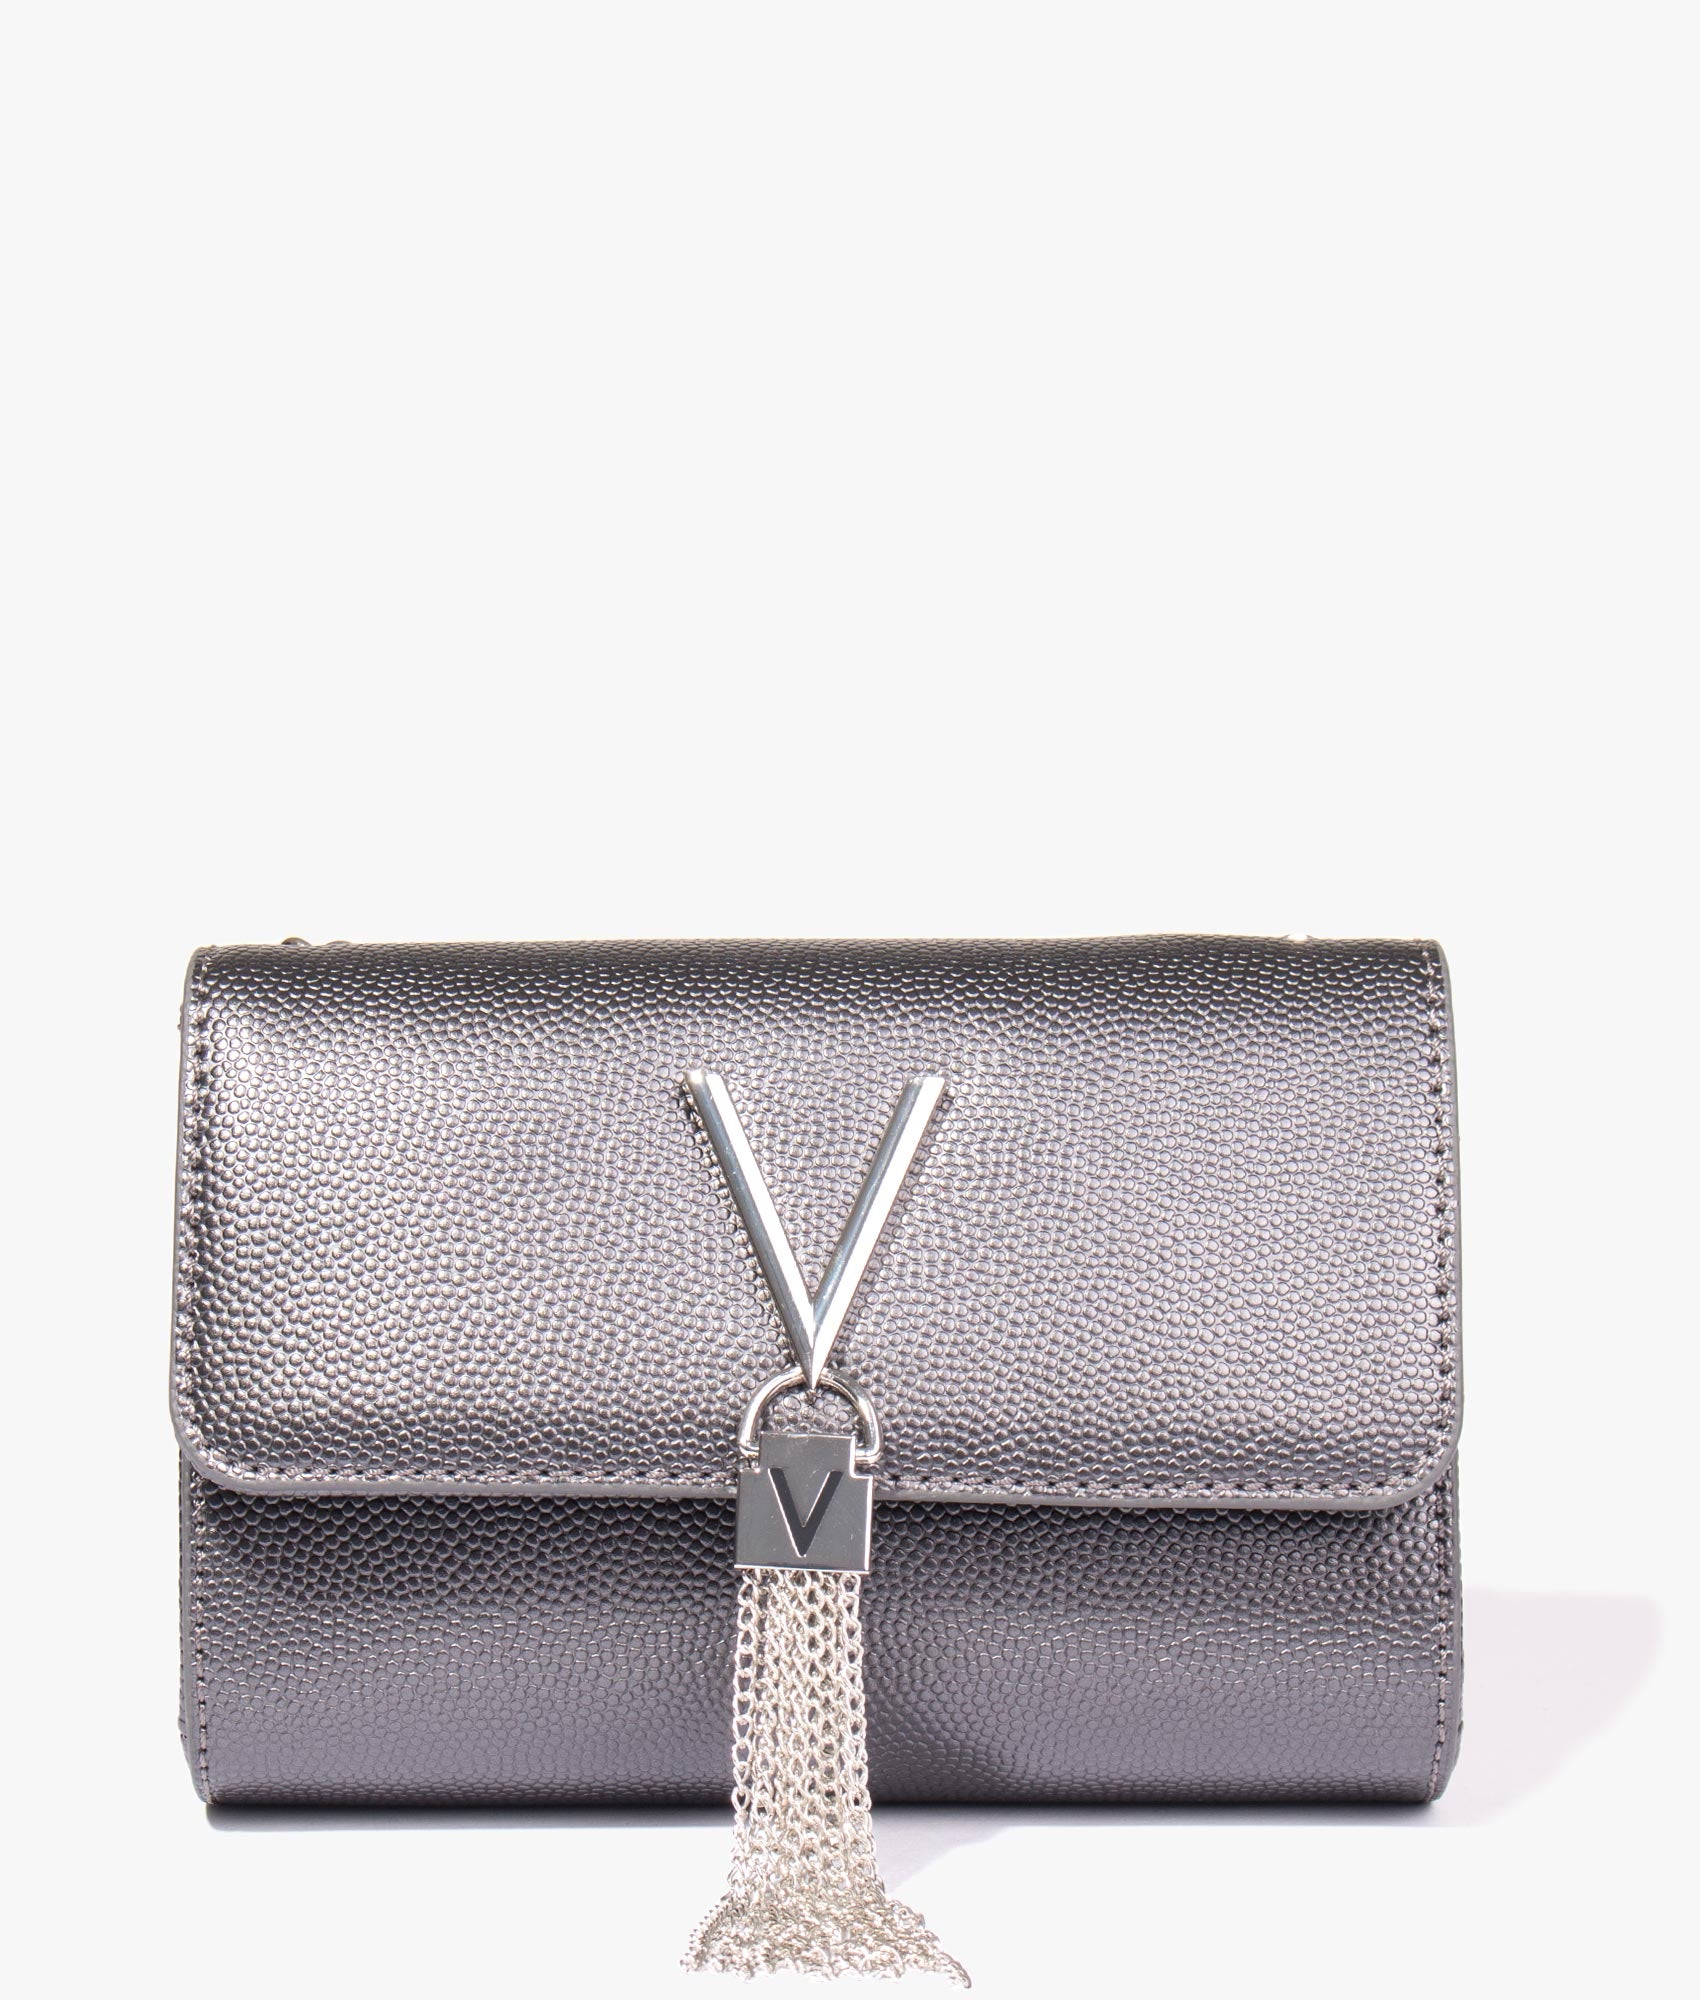 VALENTINO Divina Clutch Taupe  Buy bags, purses & accessories